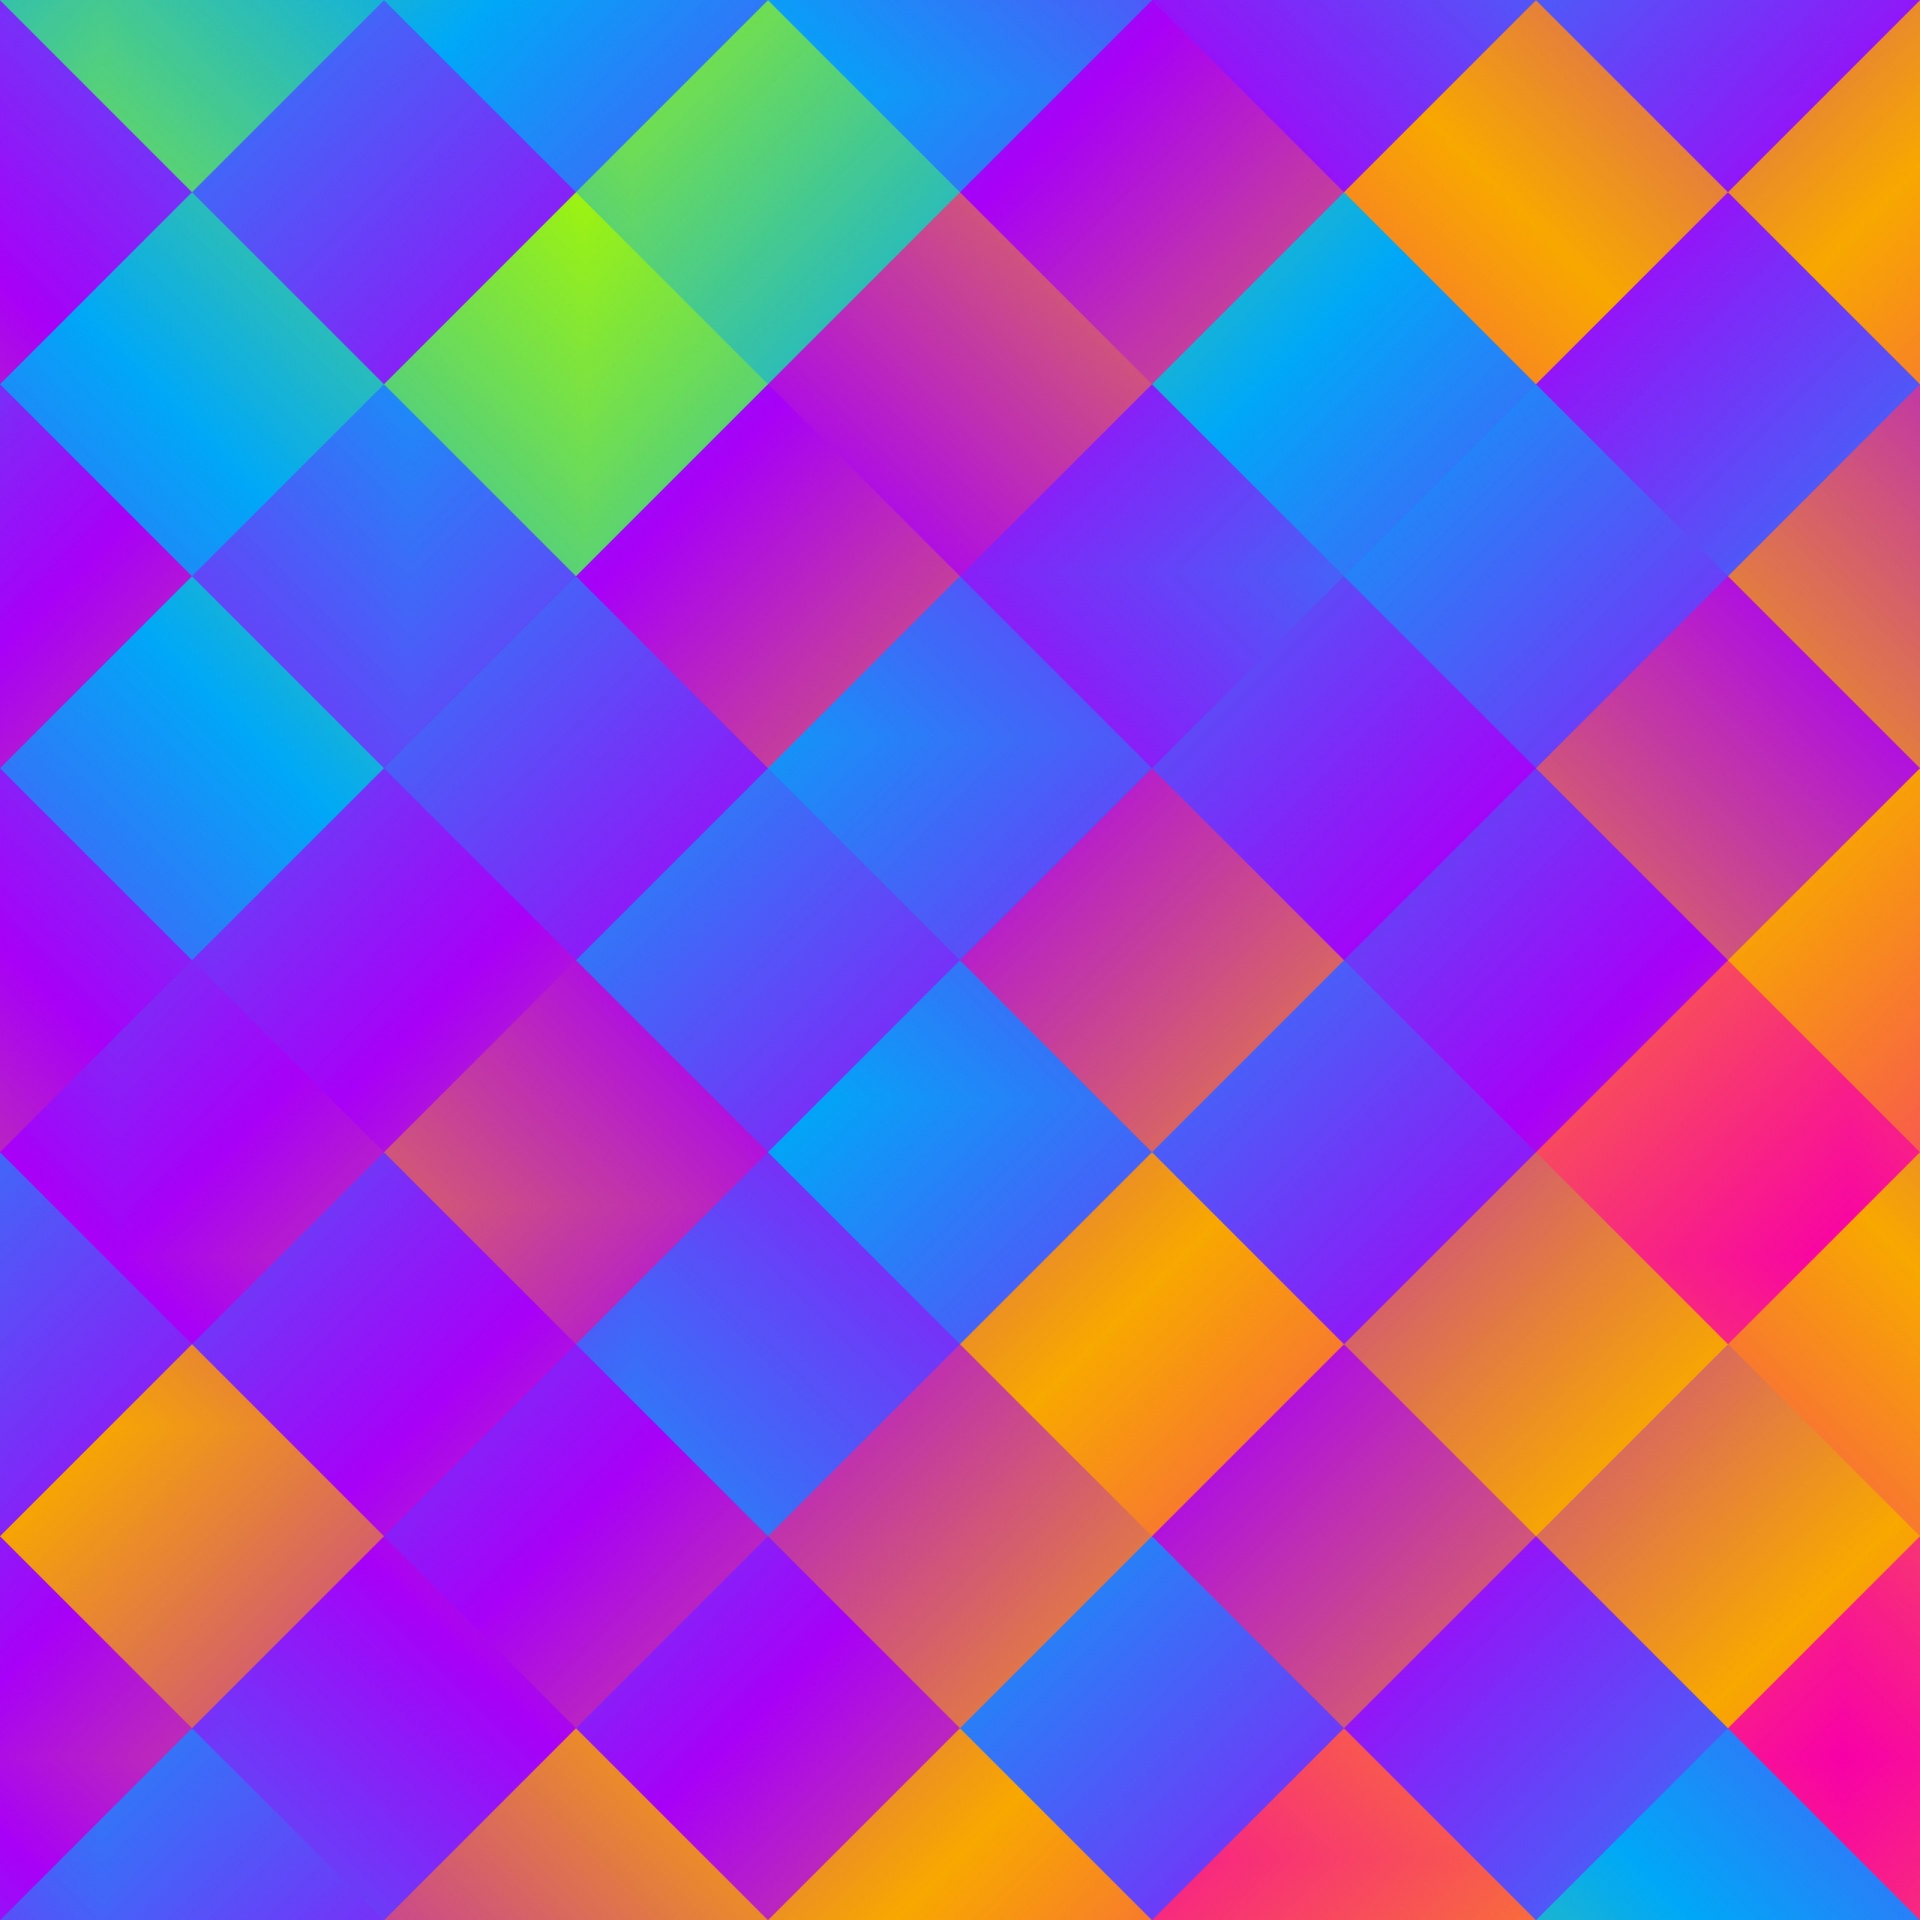 Cubes background pattern colorful rainbow colors